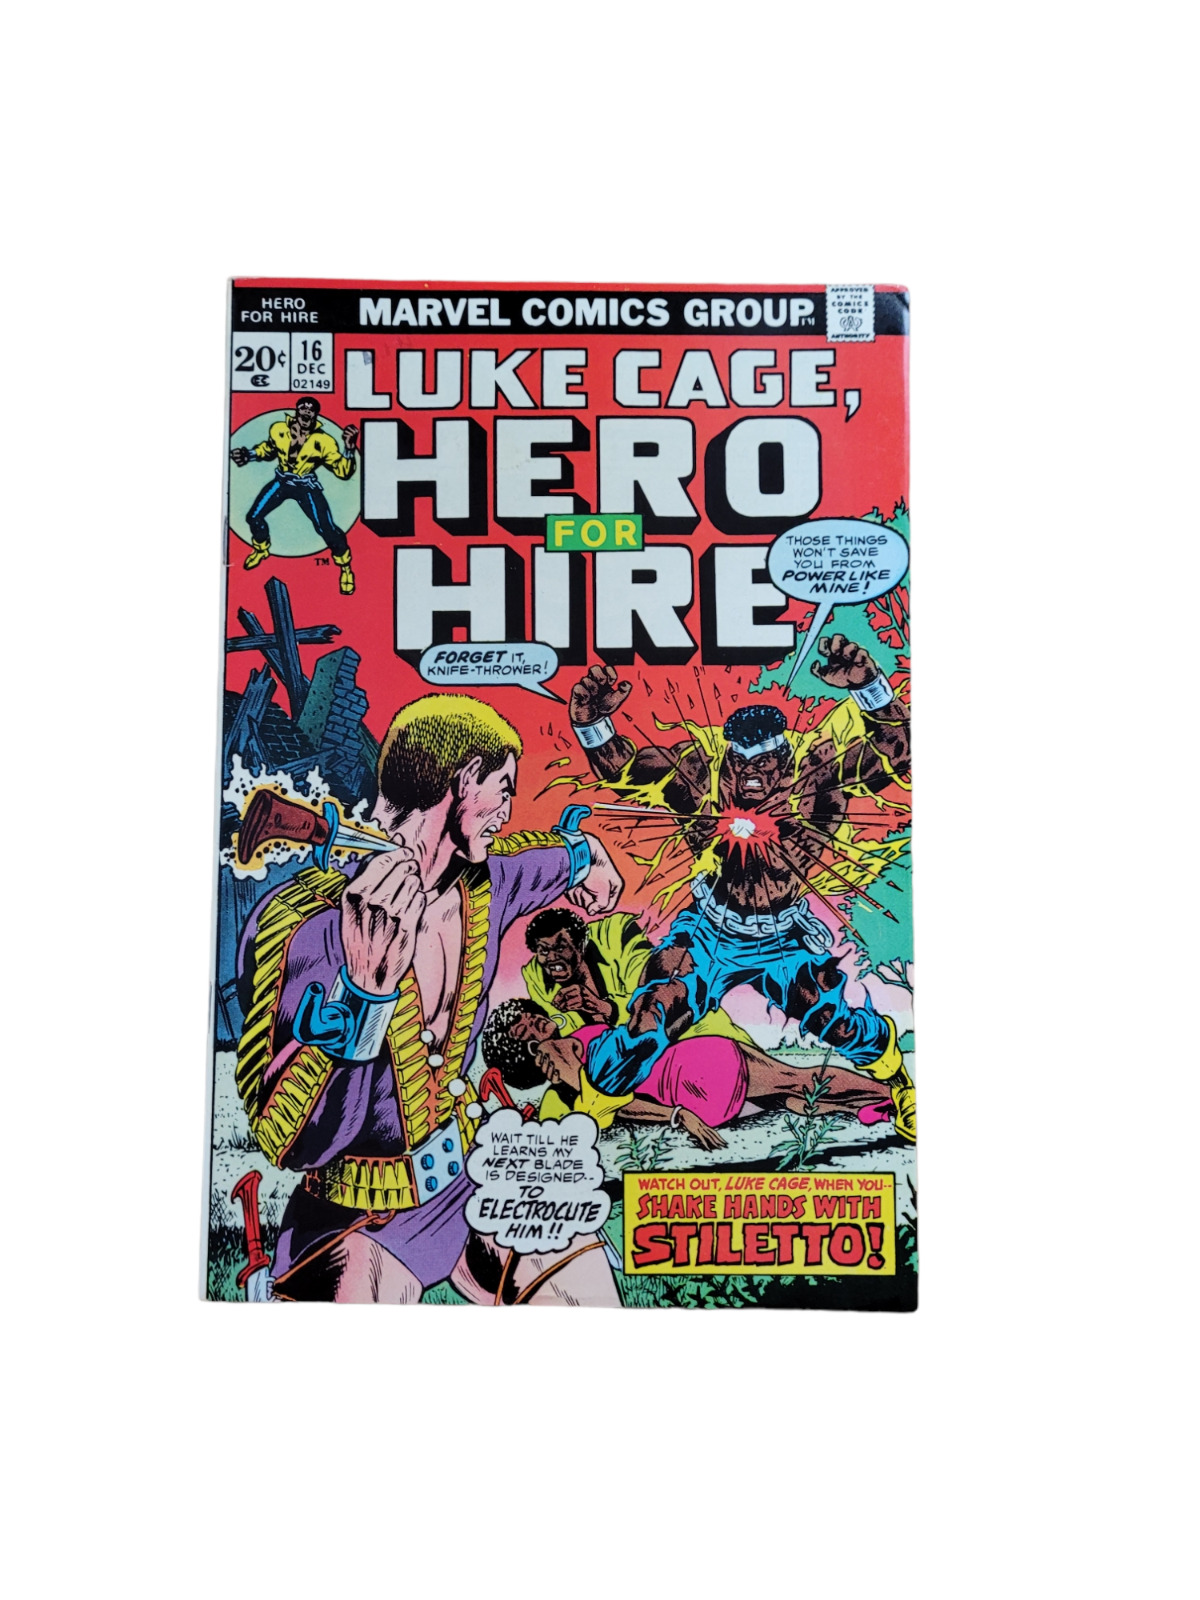 LUKE CAGE, HERO FOR HIRE #16/ KEY 1ST STILETTO APPEARANCE/KEY ISSUE FN+ RAW 1973